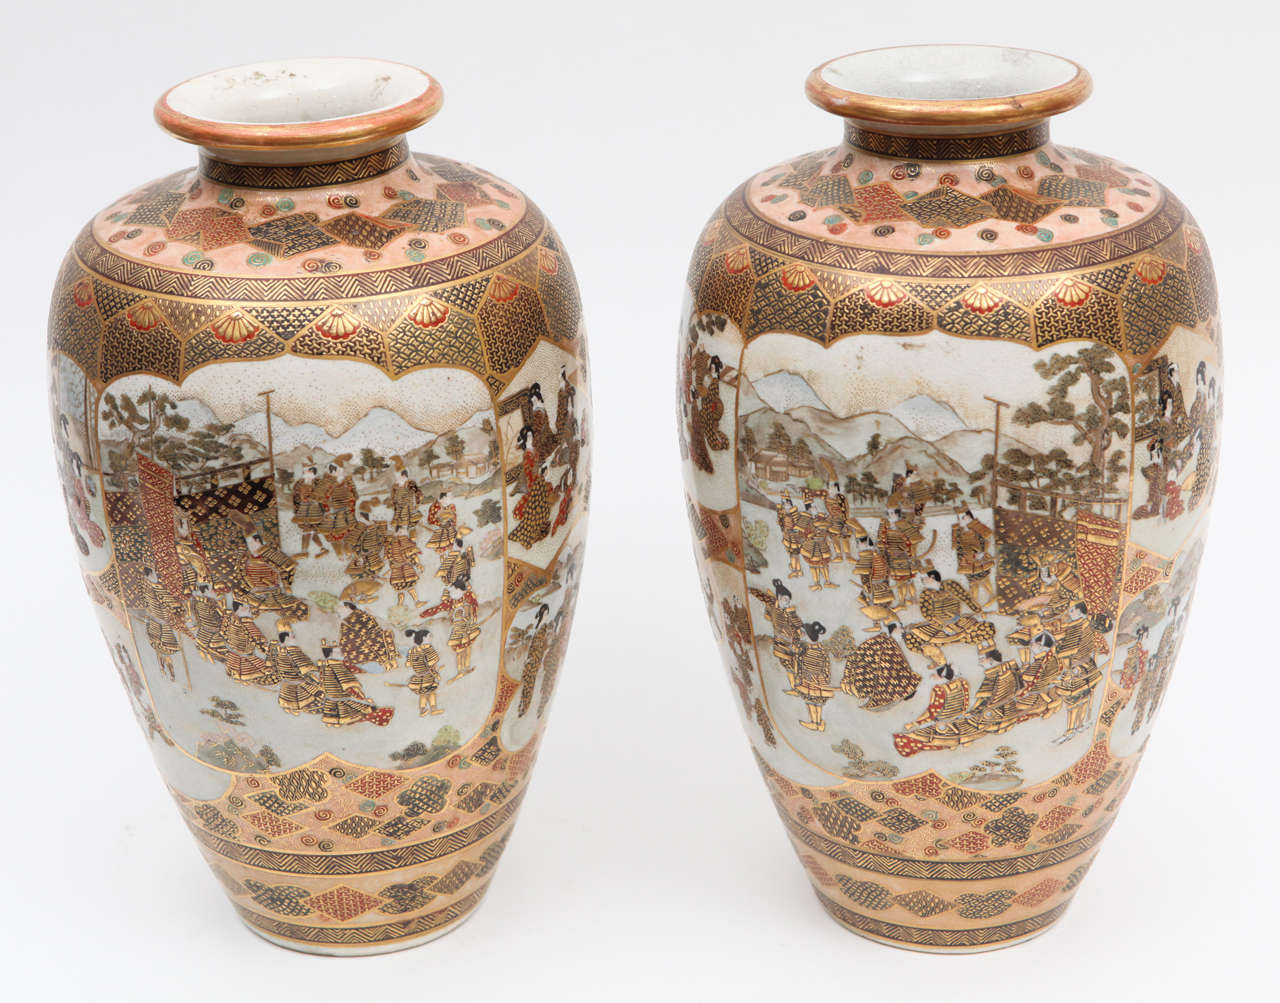 Pair of late 19th c. Japanese Satsuma Porcelain Vases with Hand Painting and Gilt Details.  Signed by Maker.